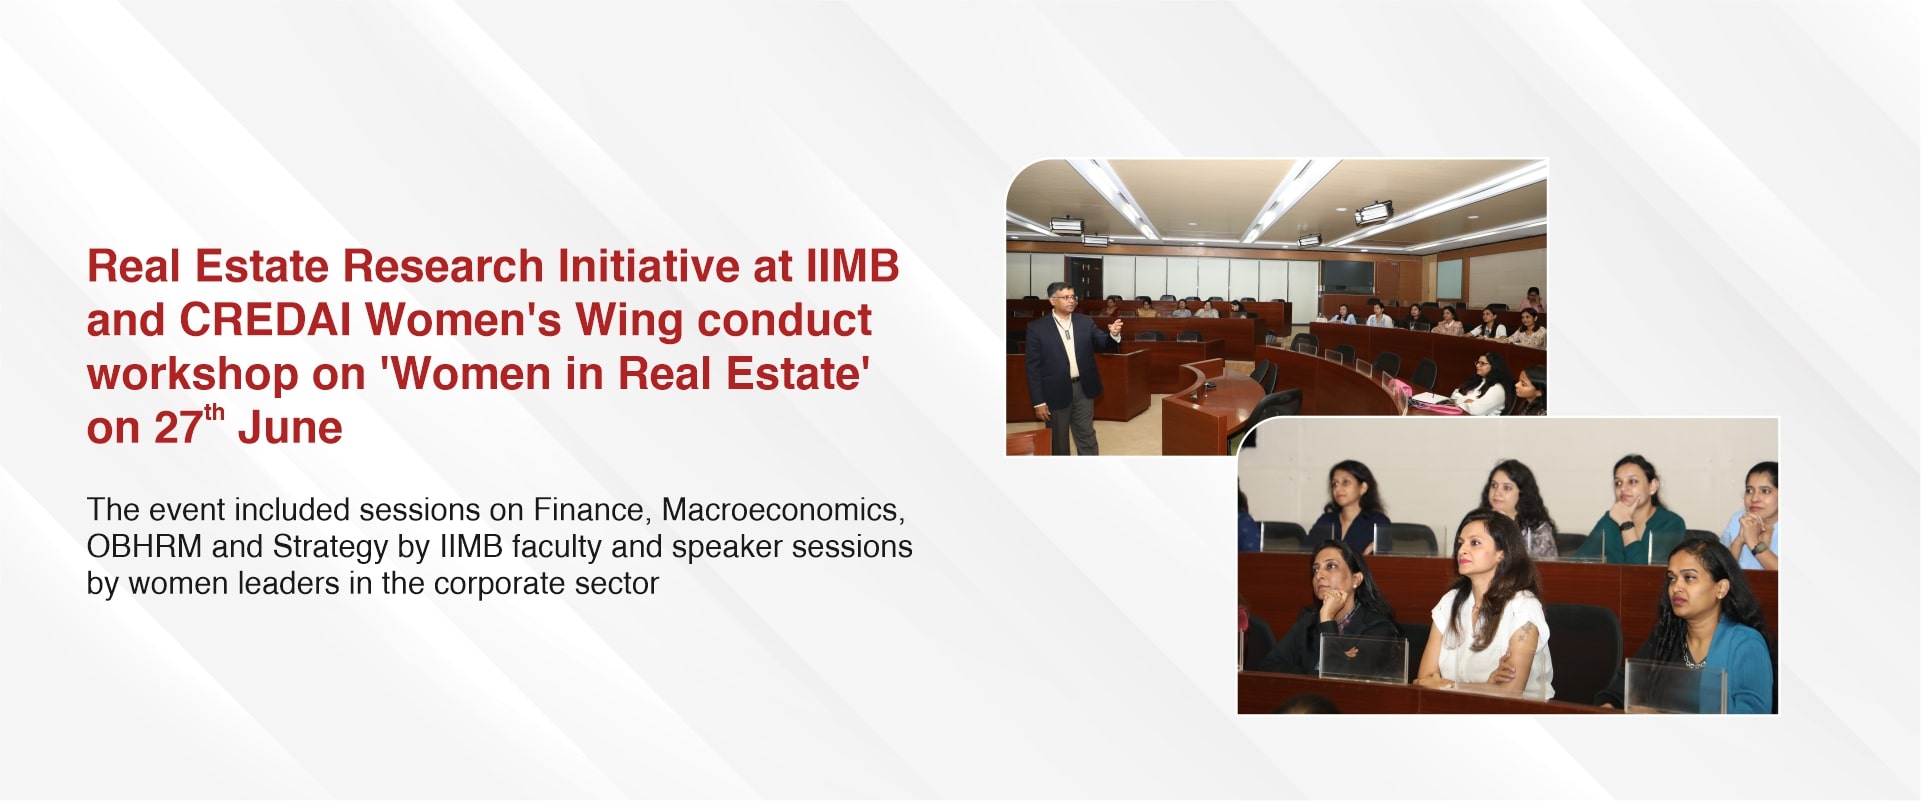 Real Estate Research Initiative at IIMB and CREDAI Women’s Wing conduct workshop on ‘Women in Real Estate’ on 27th June